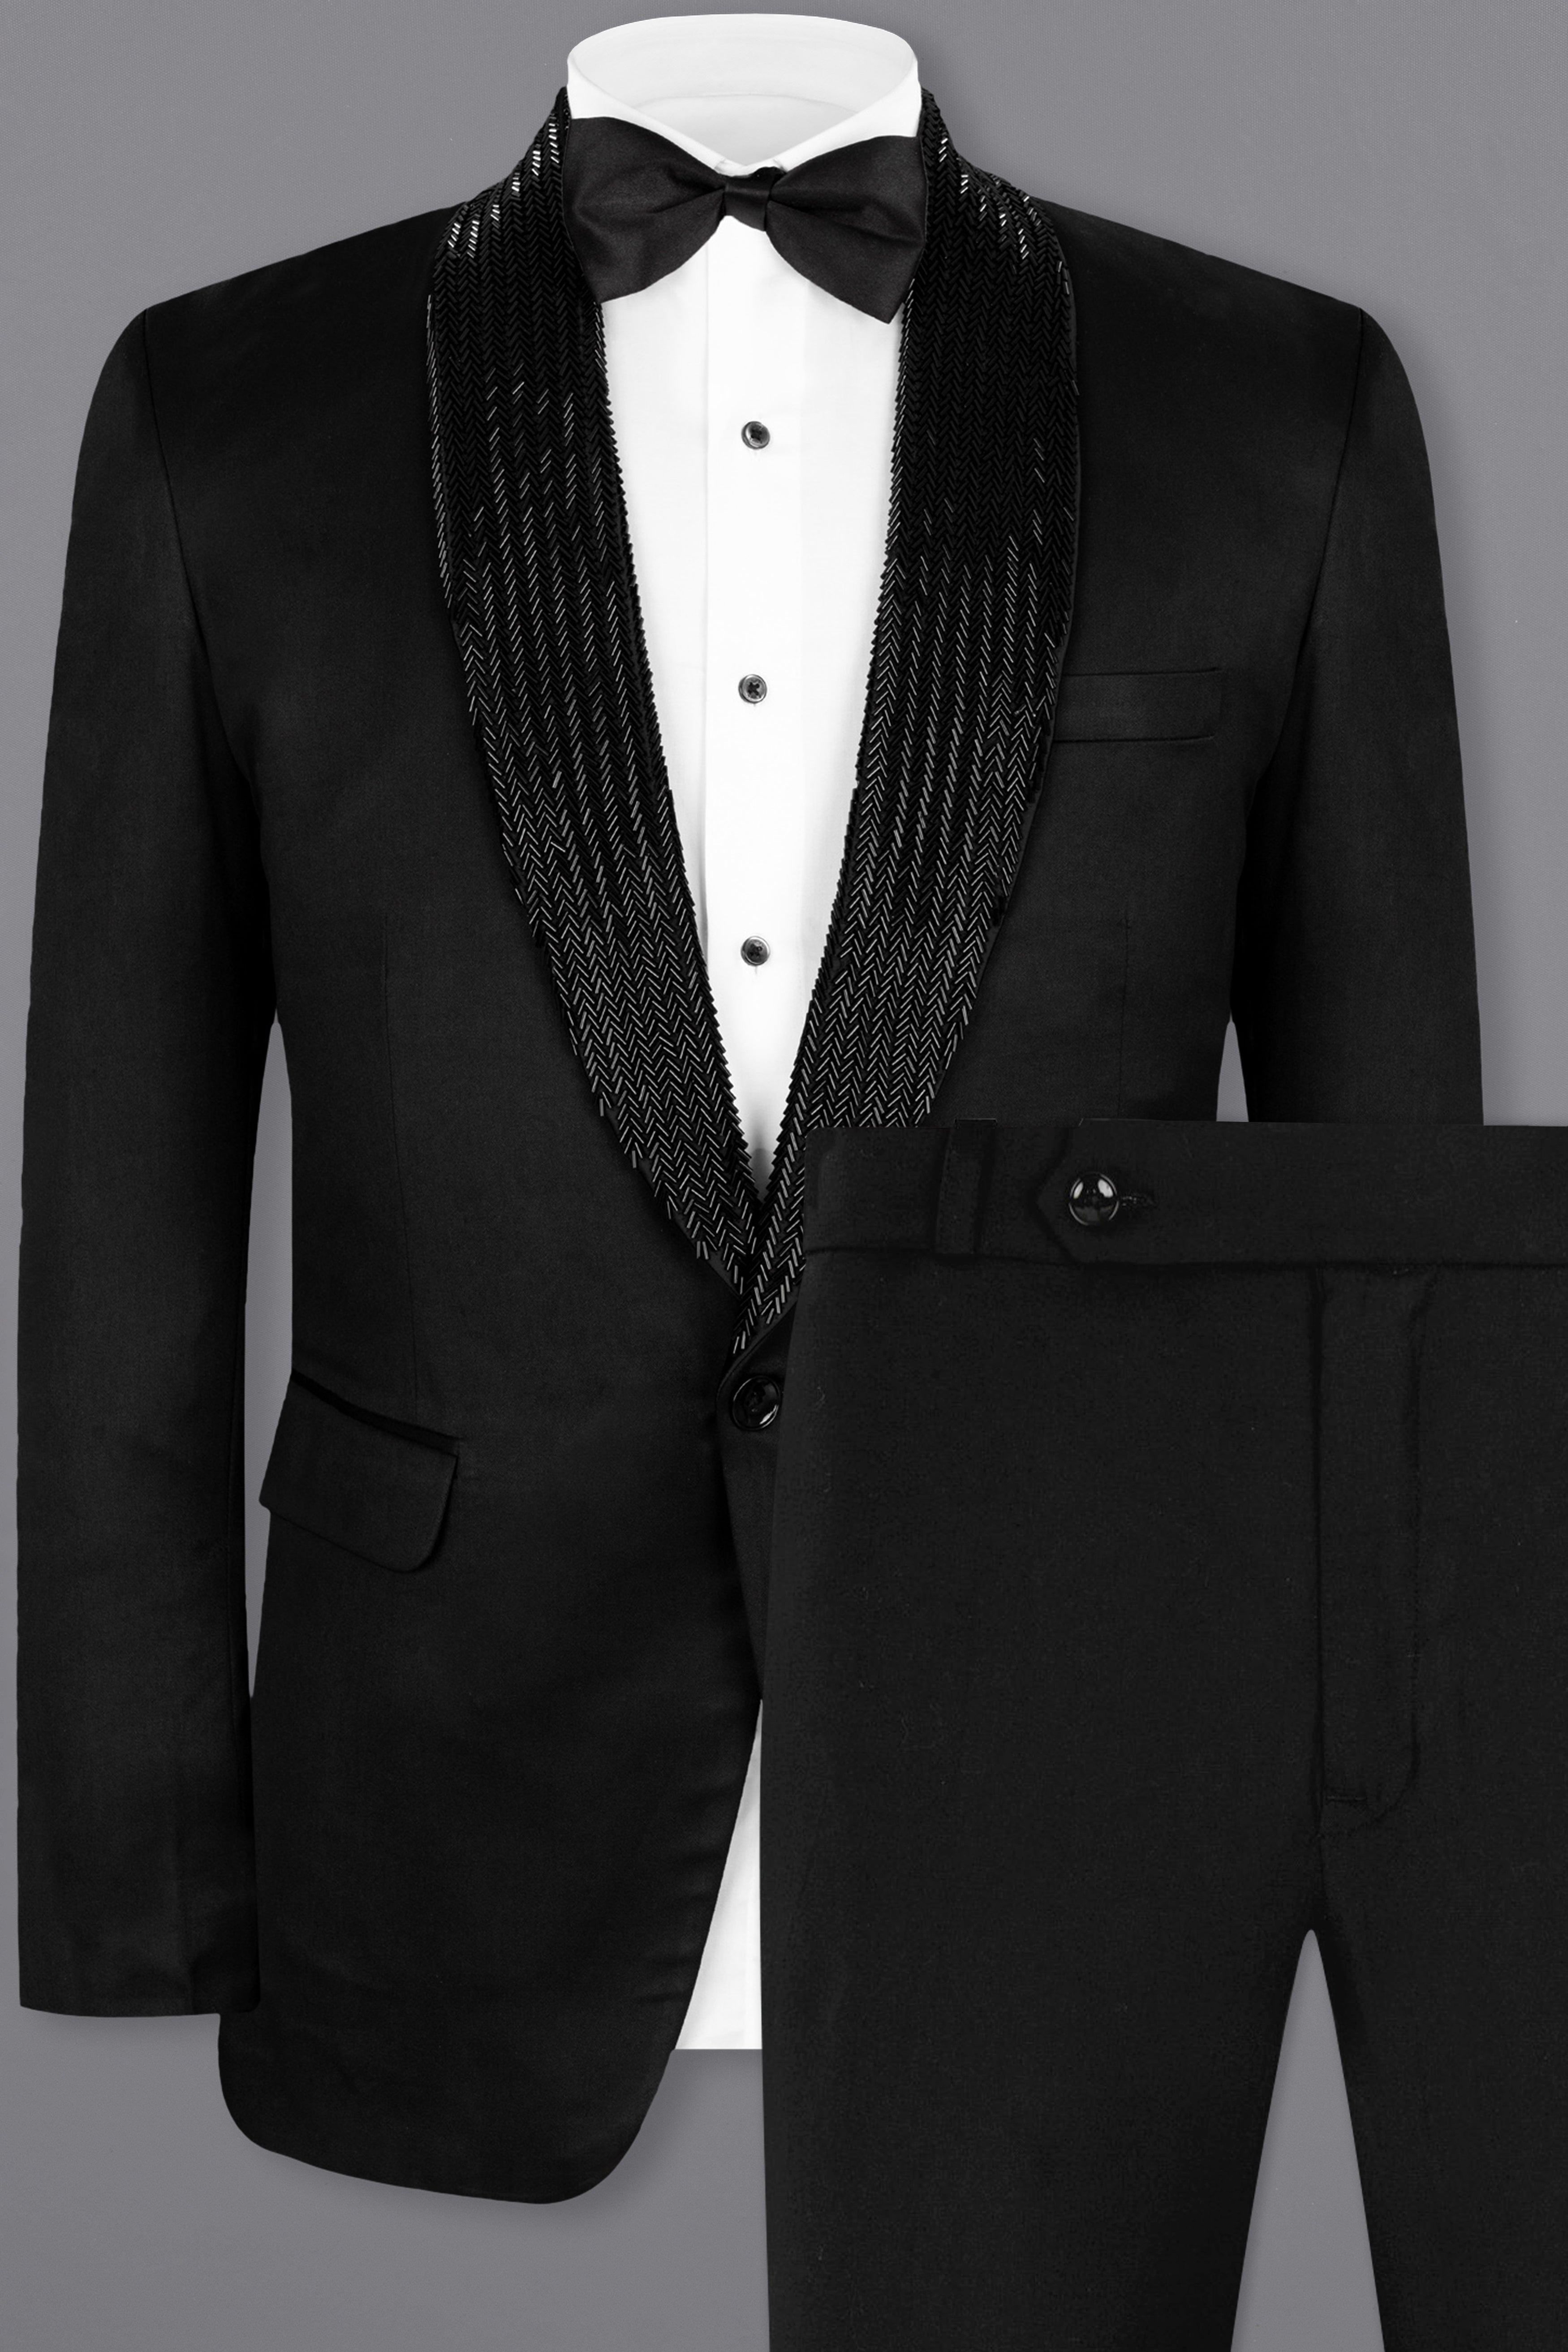 7 Outfit Options for the Groom | Black suit wedding, Wedding suits men black,  Wedding suits groom